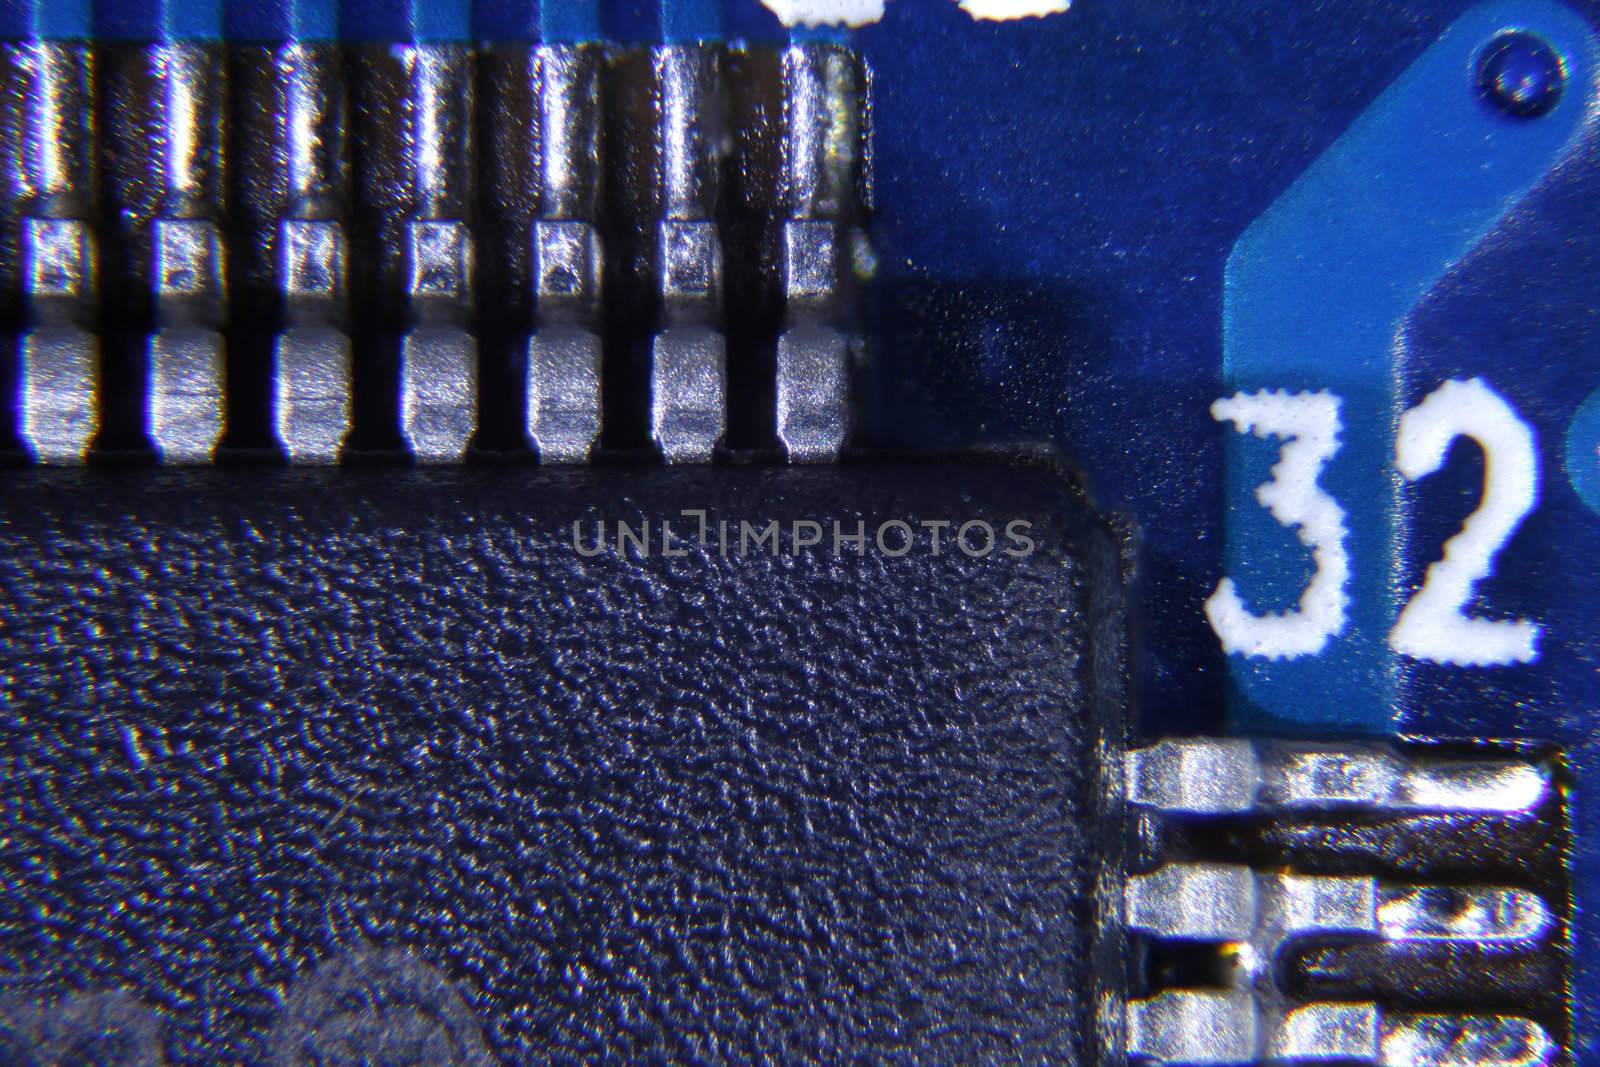 Electronic components taken with compound microscope. Magnification 20X.  Vivid colours can be seen. Images taken using techniques which aid depth of field which otherwise would not be possible with this kind of microscopic photography.